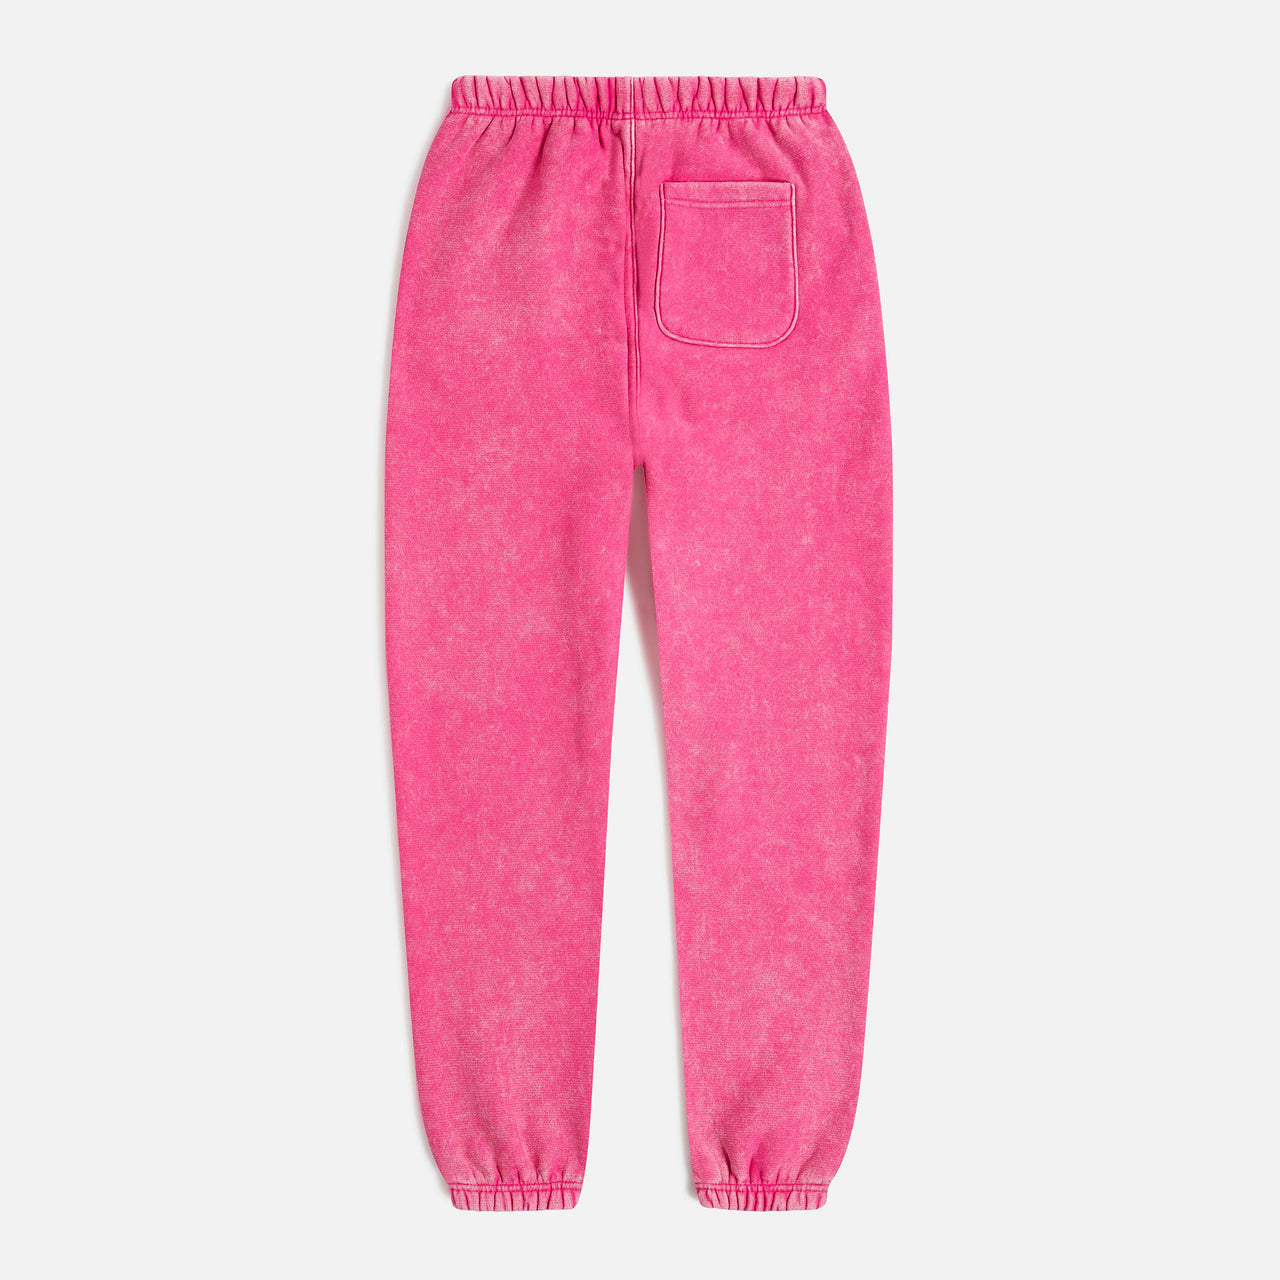 Patta Classic Washed Jogging Pants - Fuchsia Red